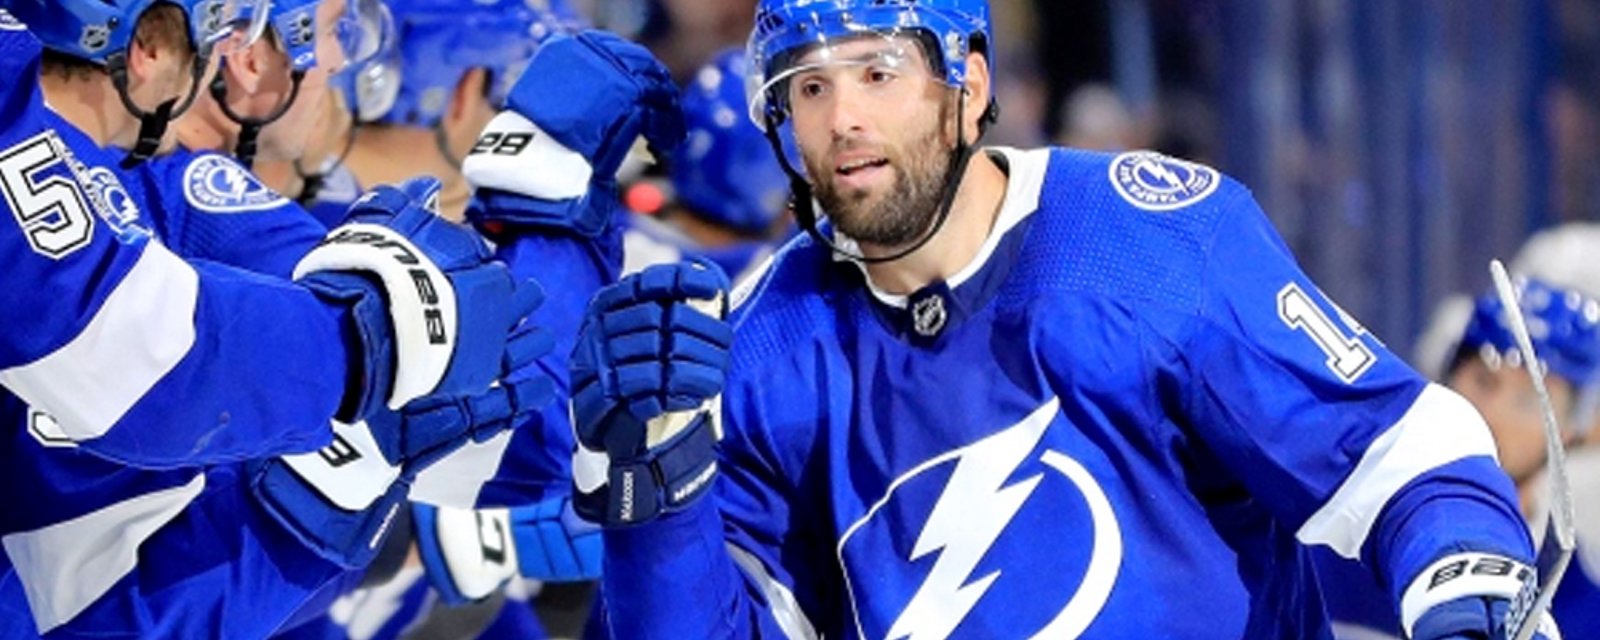 Pat Maroon goes against NHL protests, shows his support for murdered St. Louis police officer 